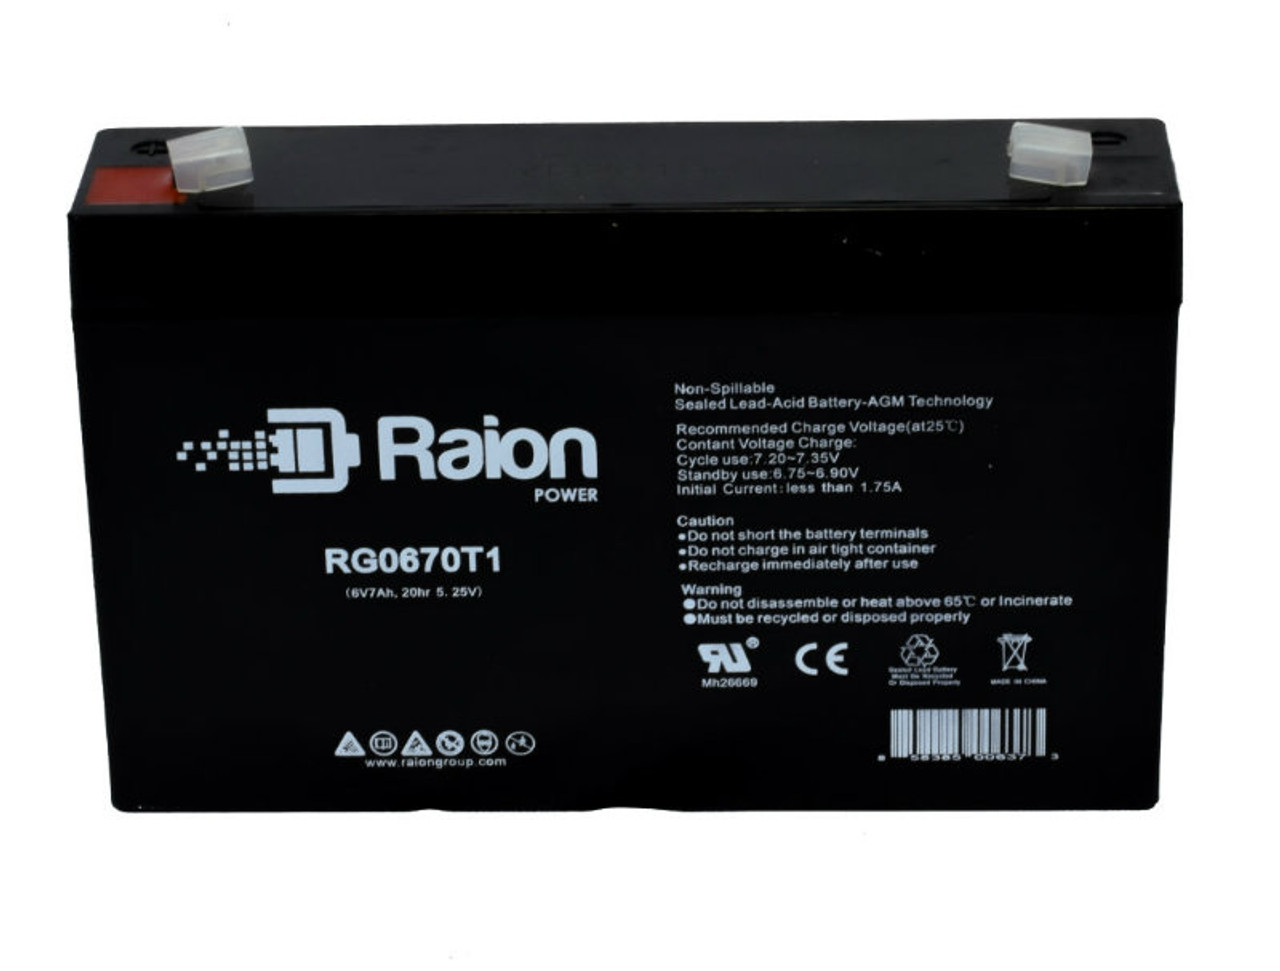 Raion Power RG0670T1 Replacement Battery Cartridge for Kid Motorz 0571 Hummer H2 Yellow